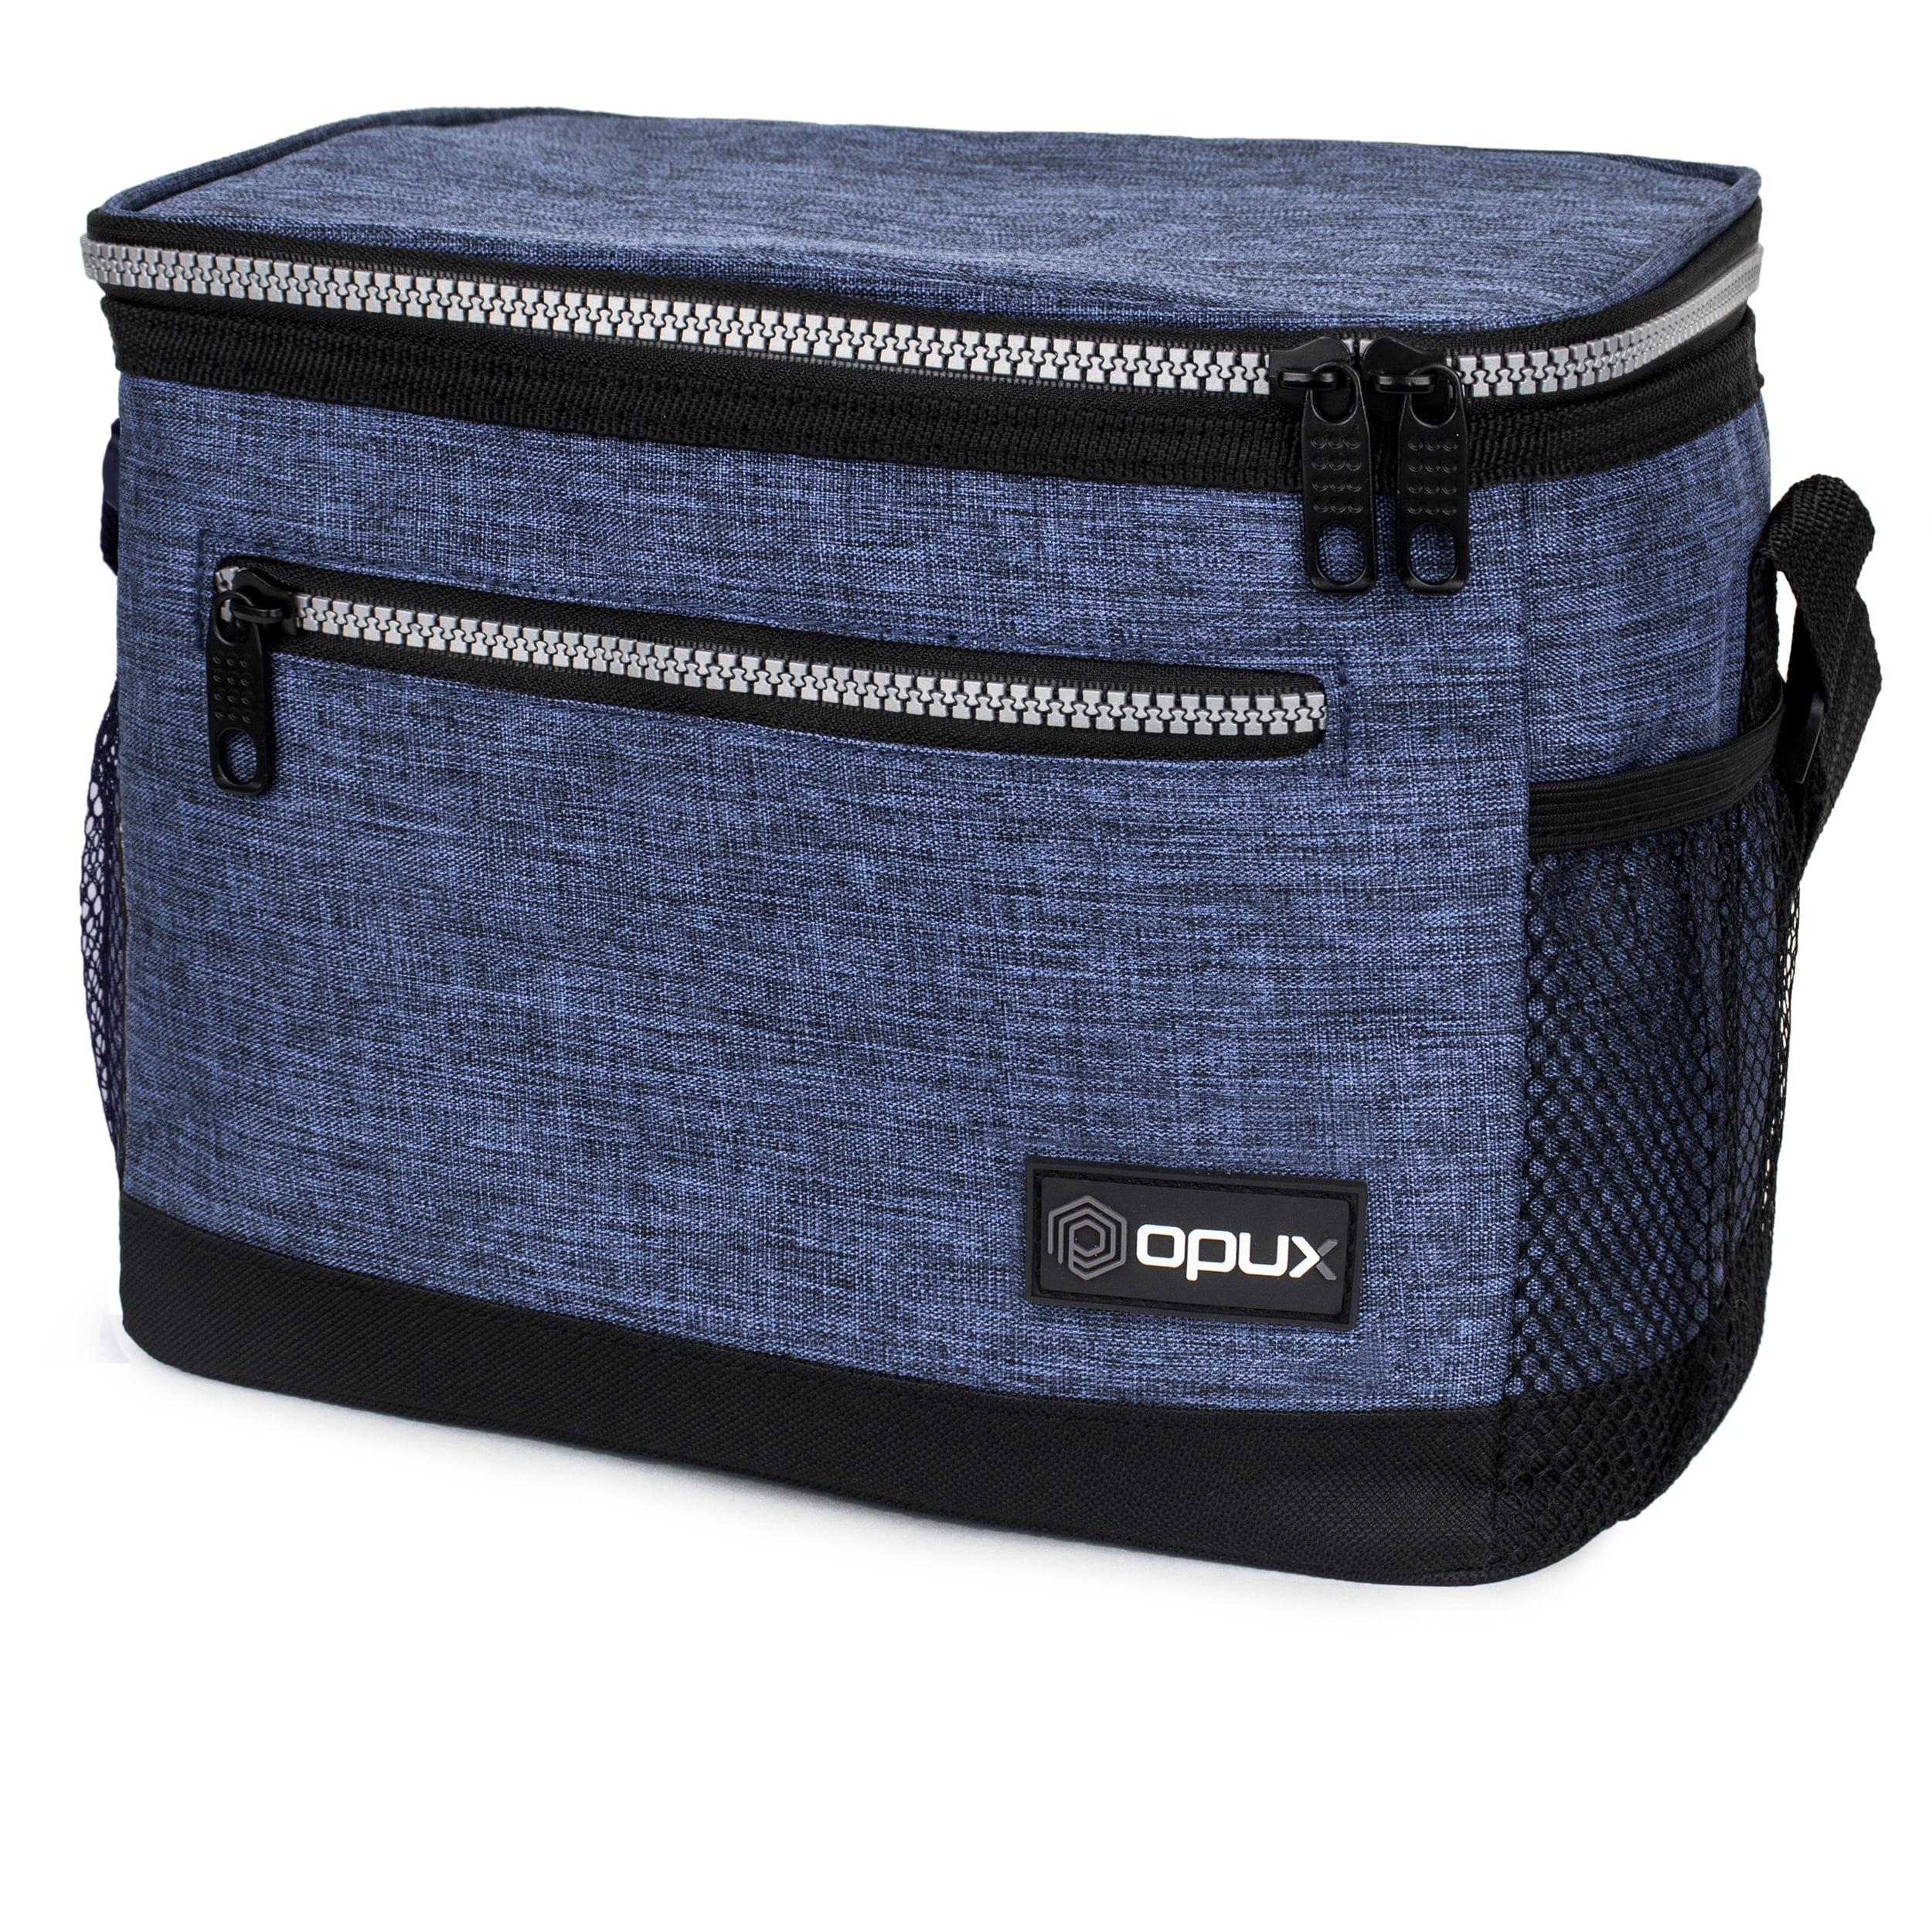 Opux Lunch Bag Women, Insulated Tote Box Kids Men Girls Adults